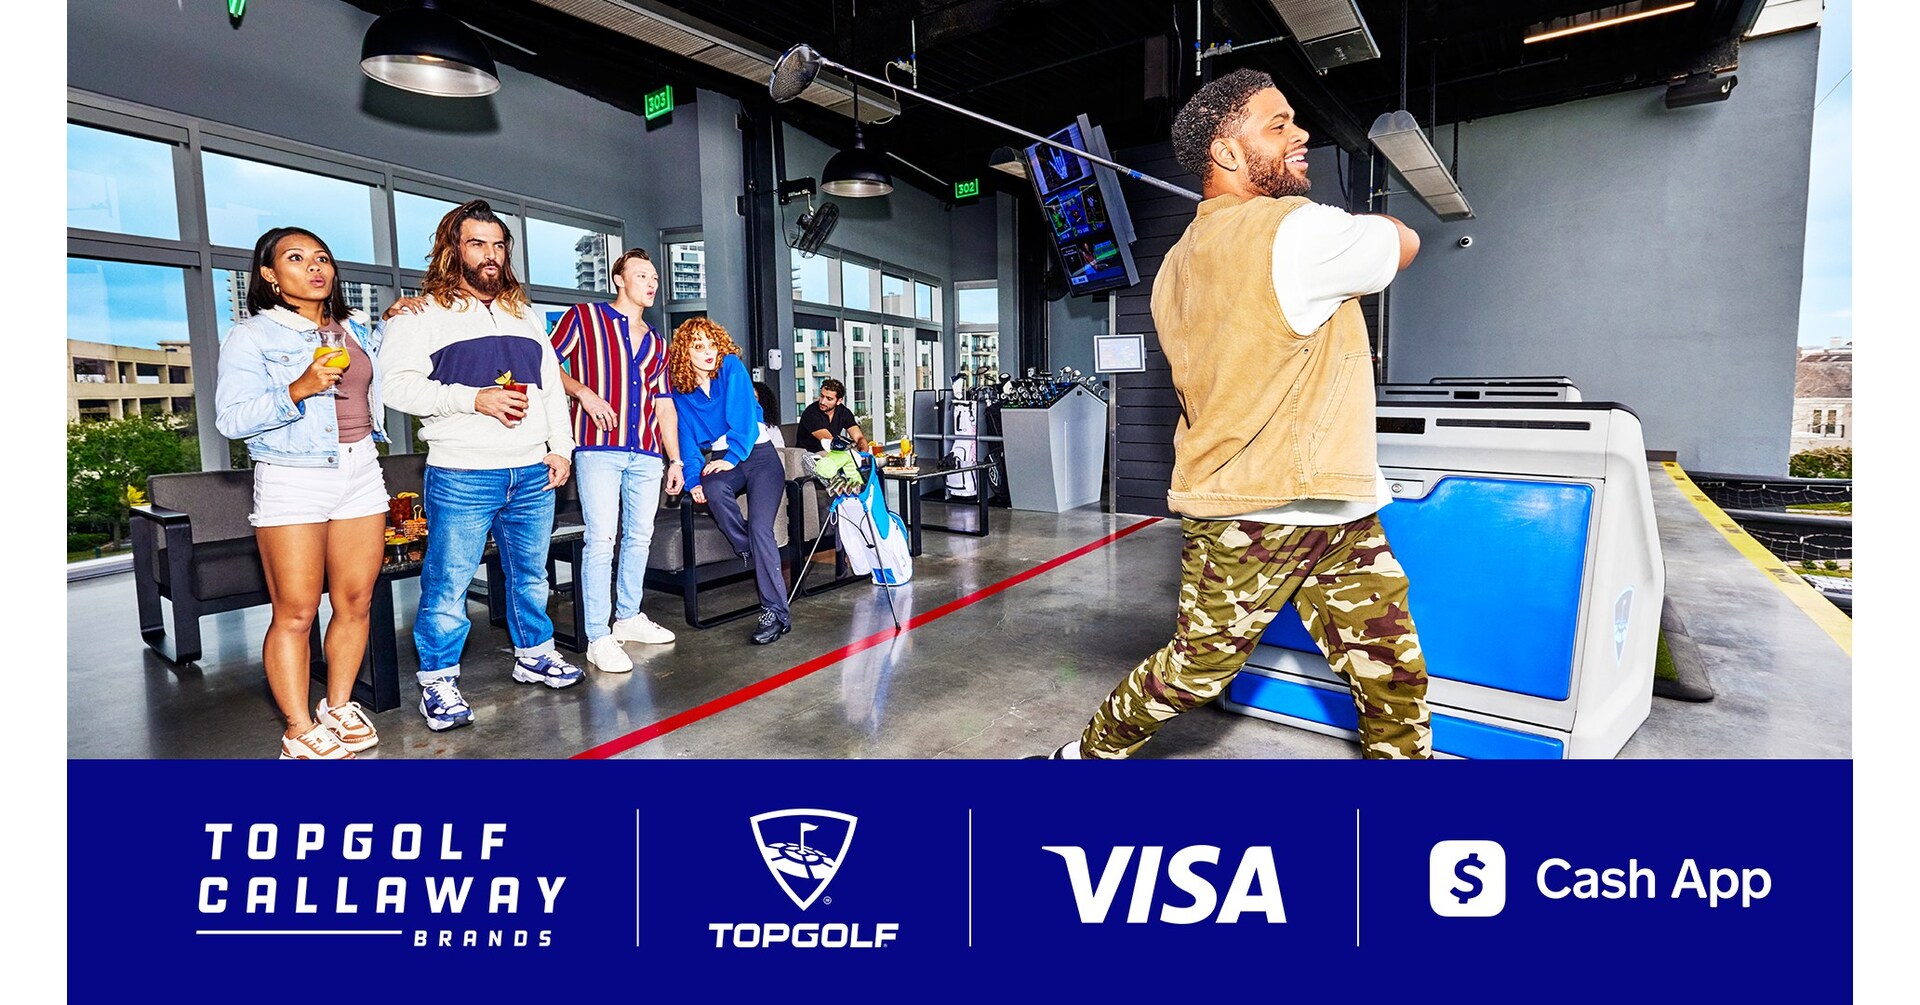 Topgolf Callaway Brands Joins Forces with Visa